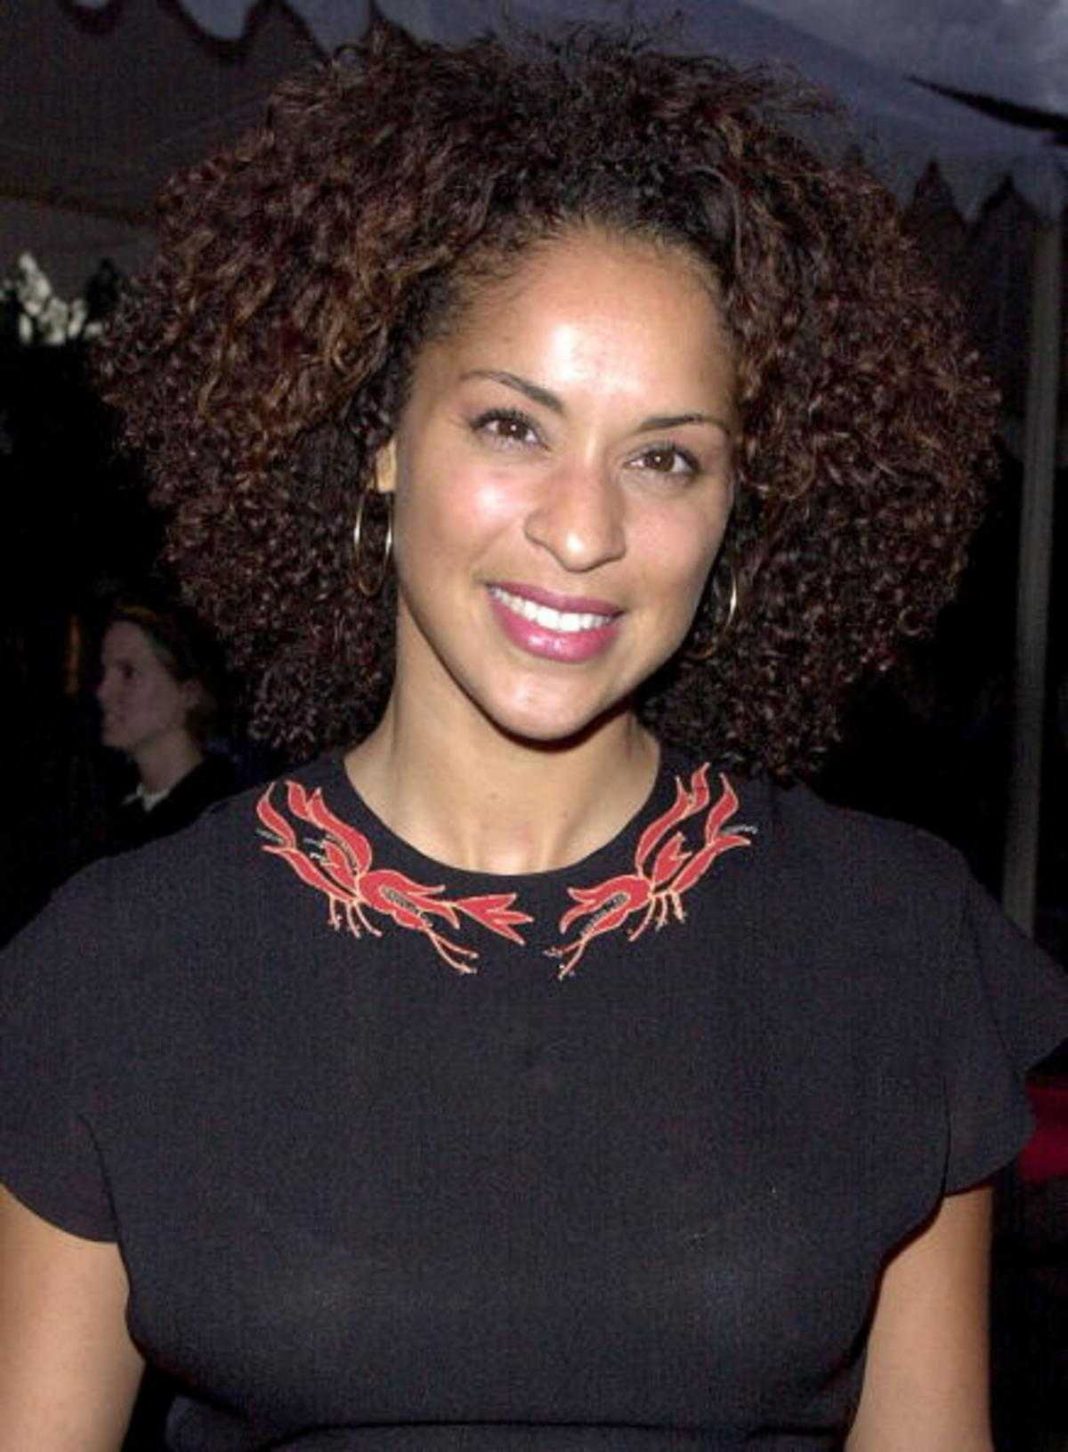 40 Karyn Parsons Nude Pictures Flaunt Her Diva Like Looks 49